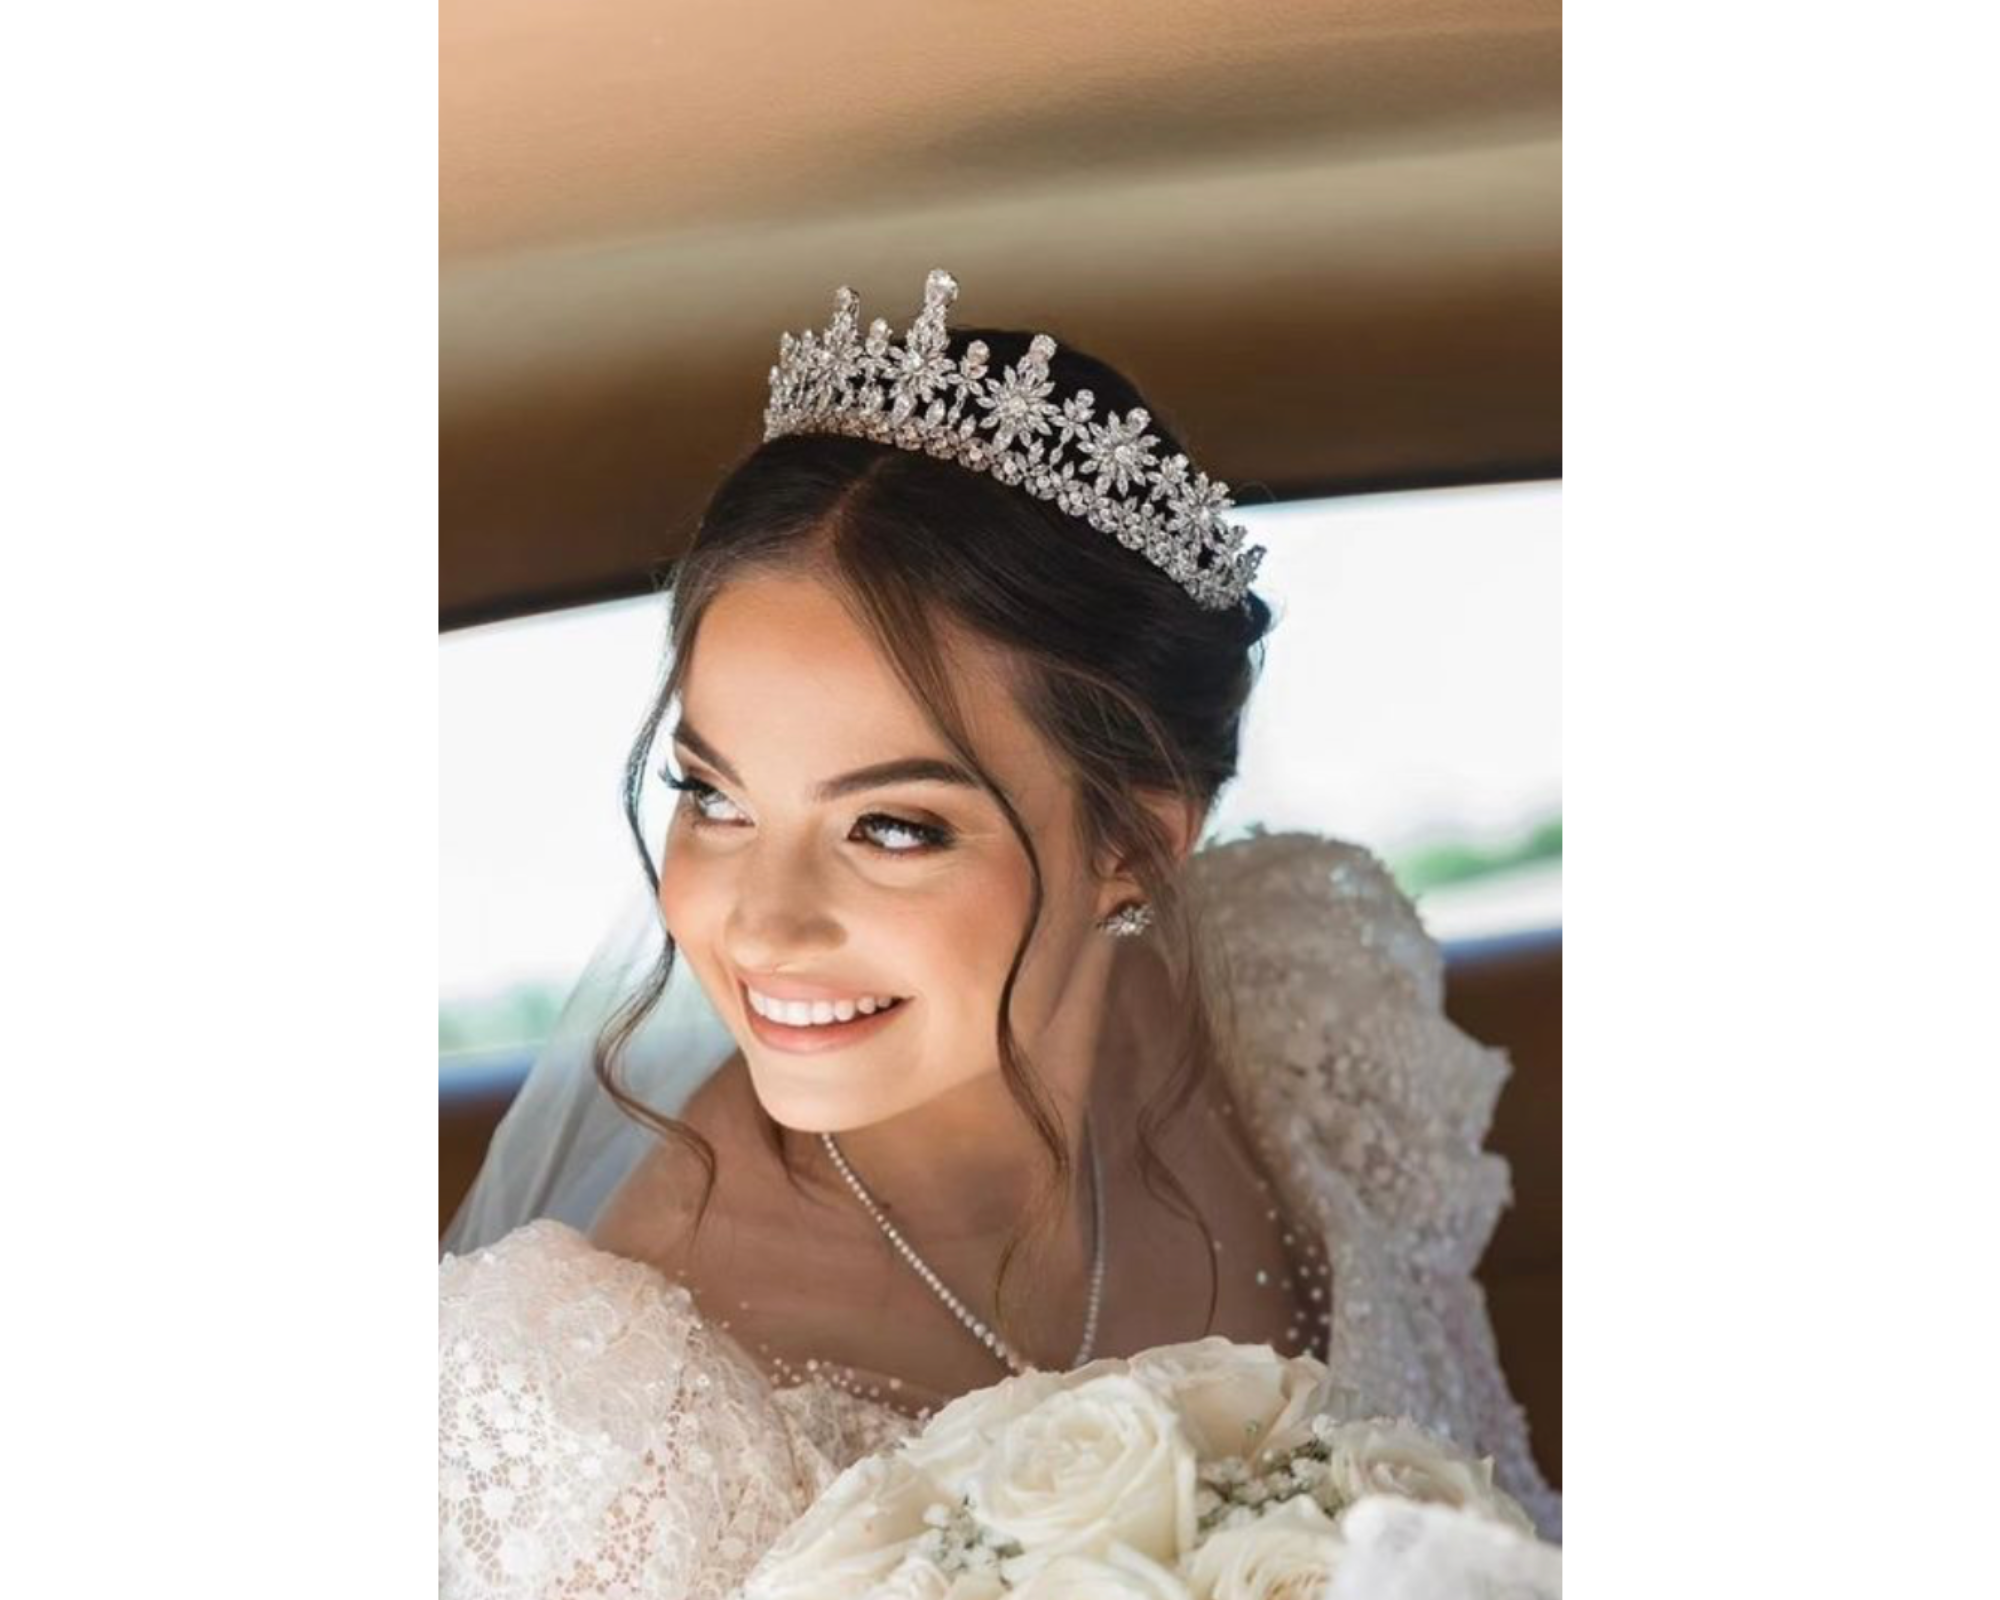 A beautiful bride leaning forward in her limo and wearing a delicate Swarovski crystal tiara.